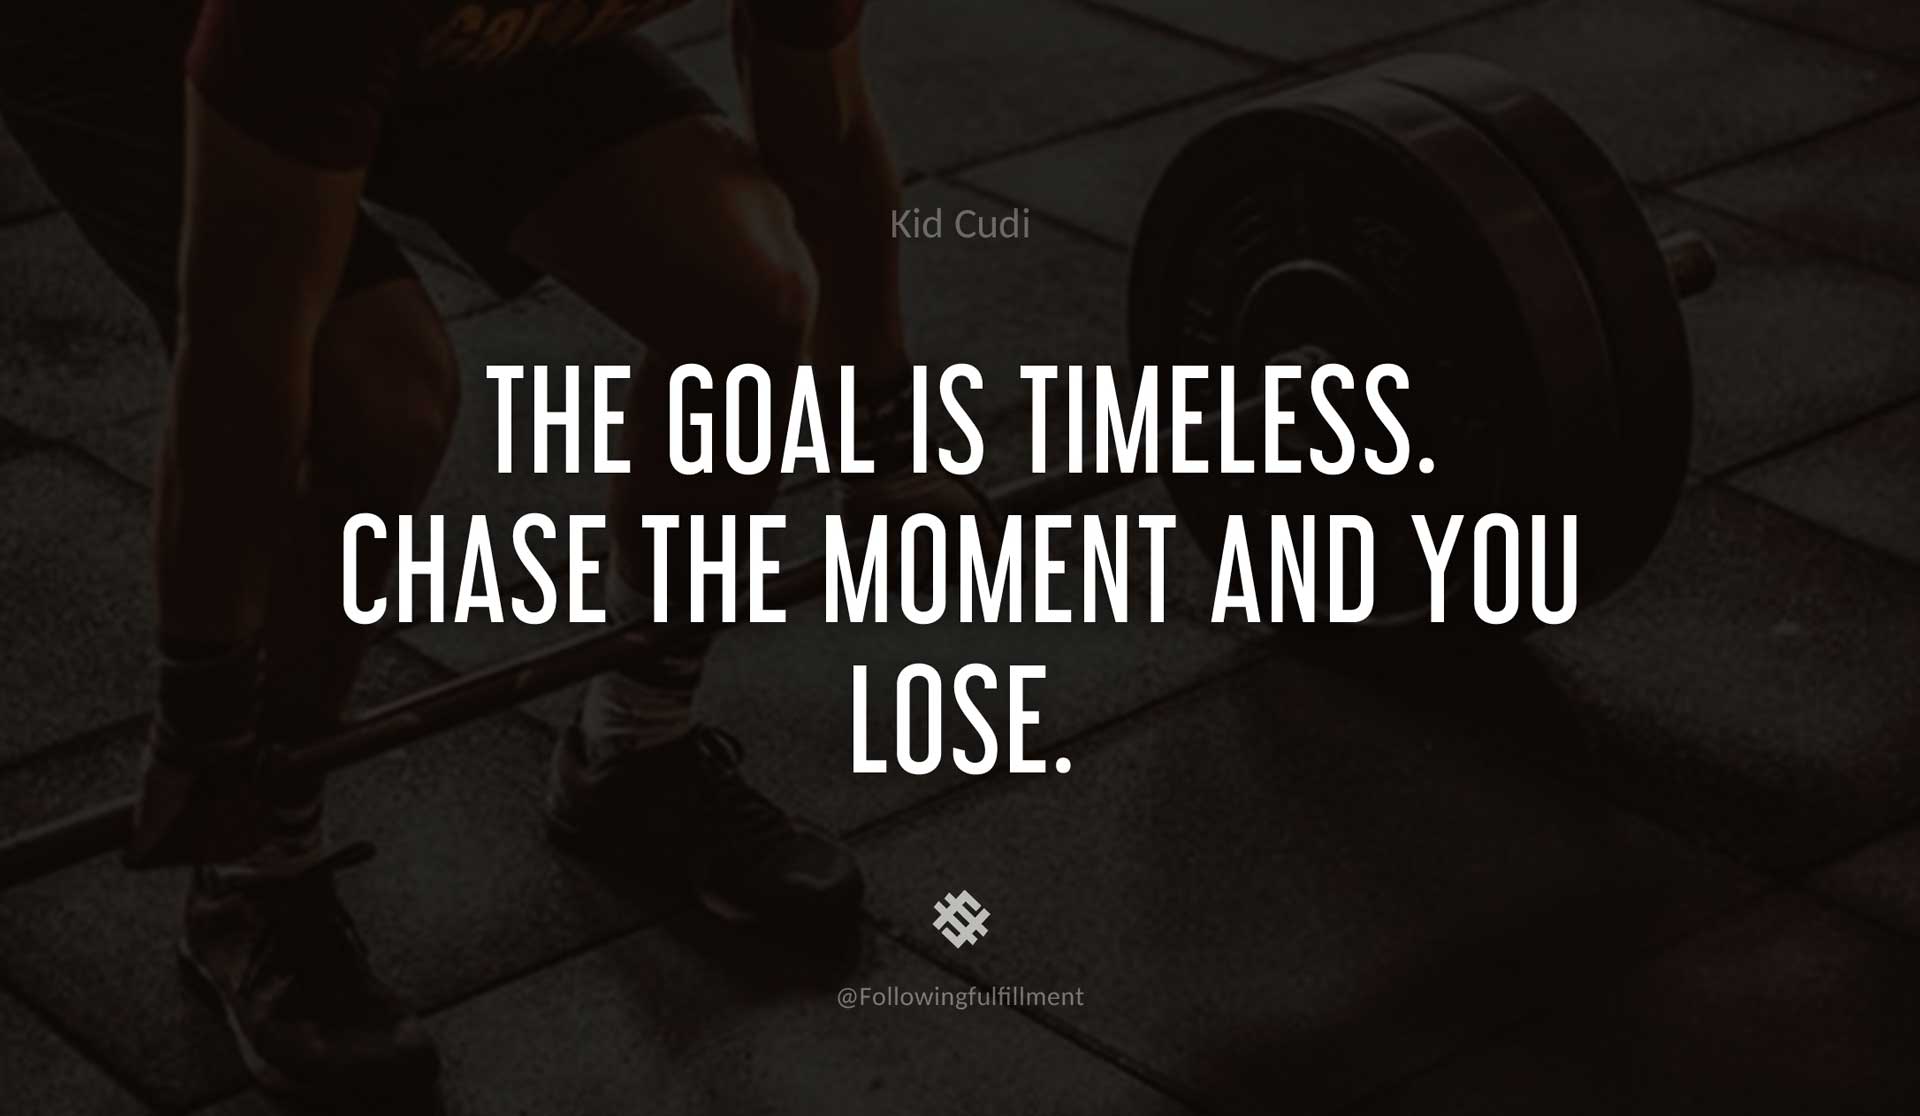 The-goal-is-timeless.-Chase-the-moment-and-you-lose.-KID-CUDI-Quote.jpg